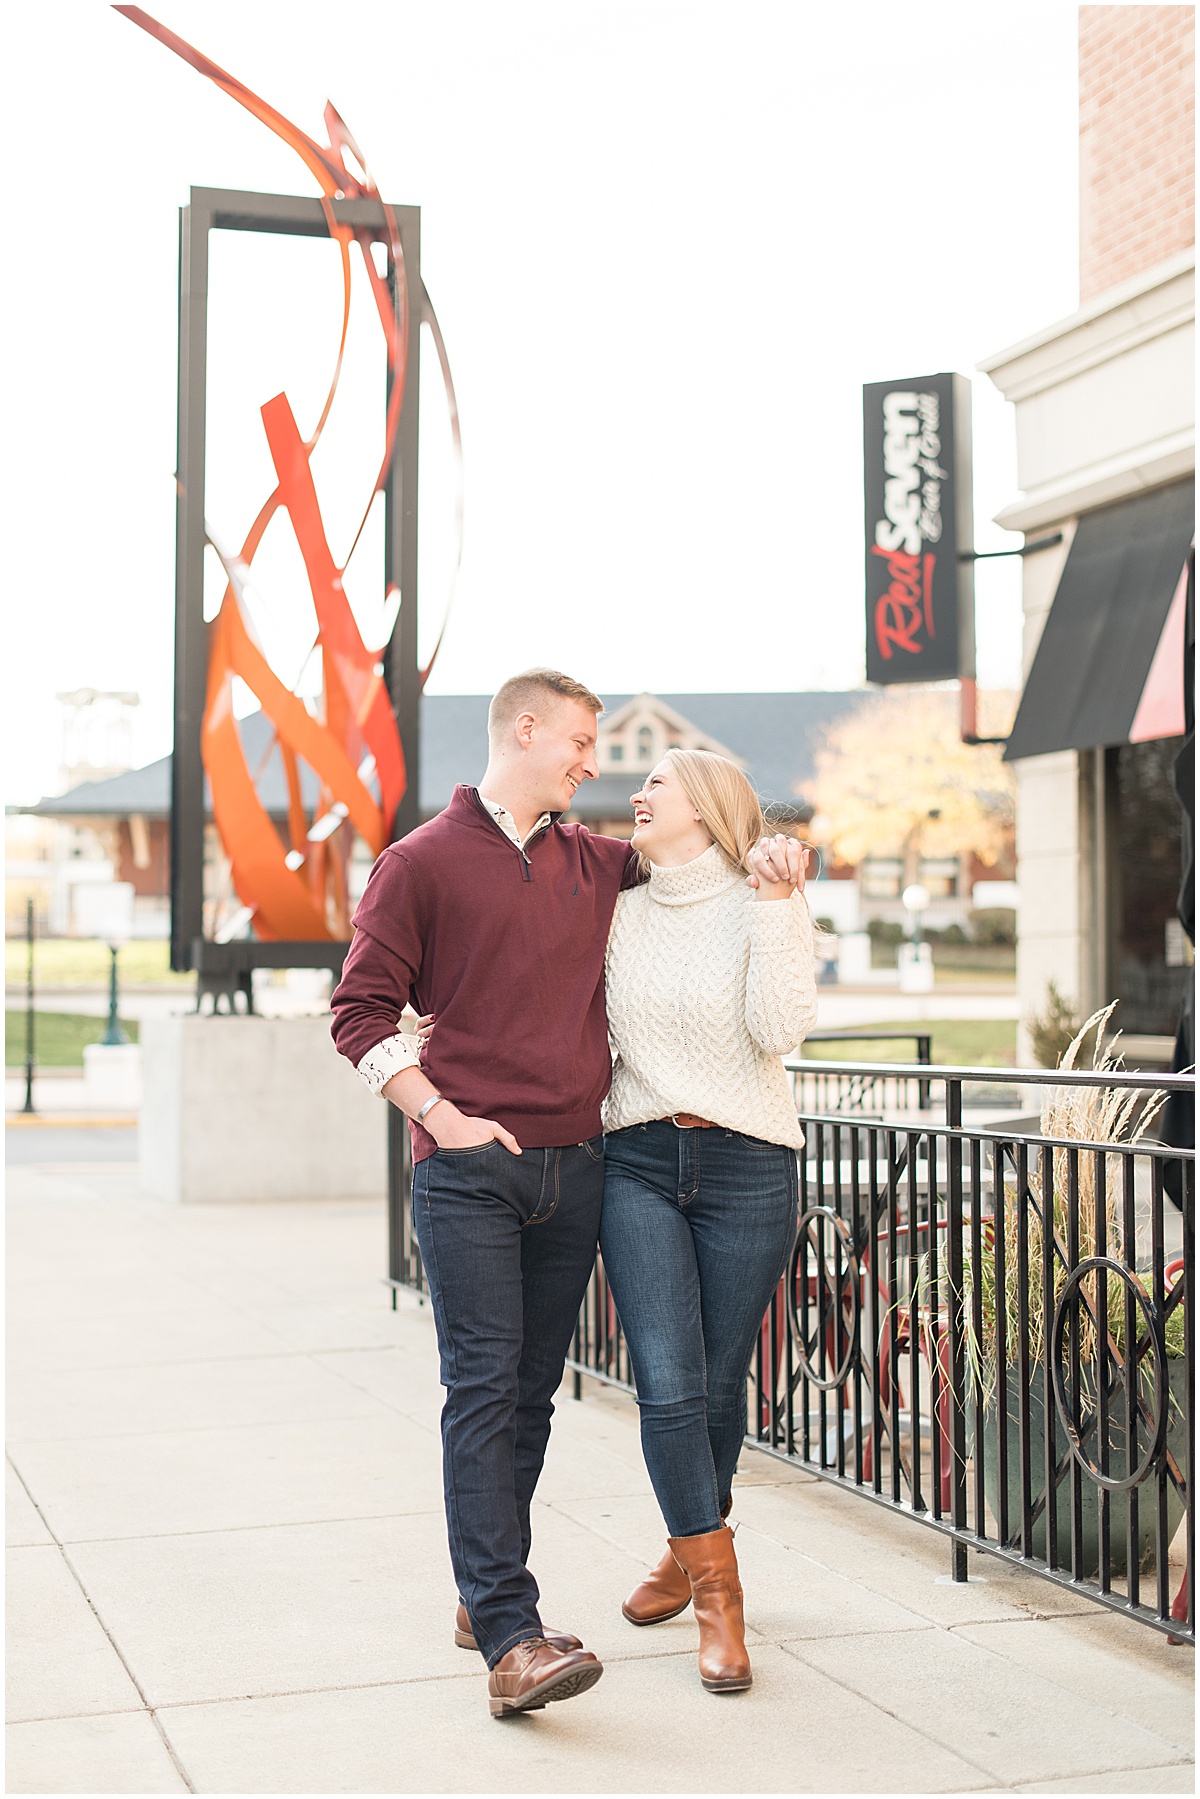 Fall engagement photos in downtown Lafayette, Indiana